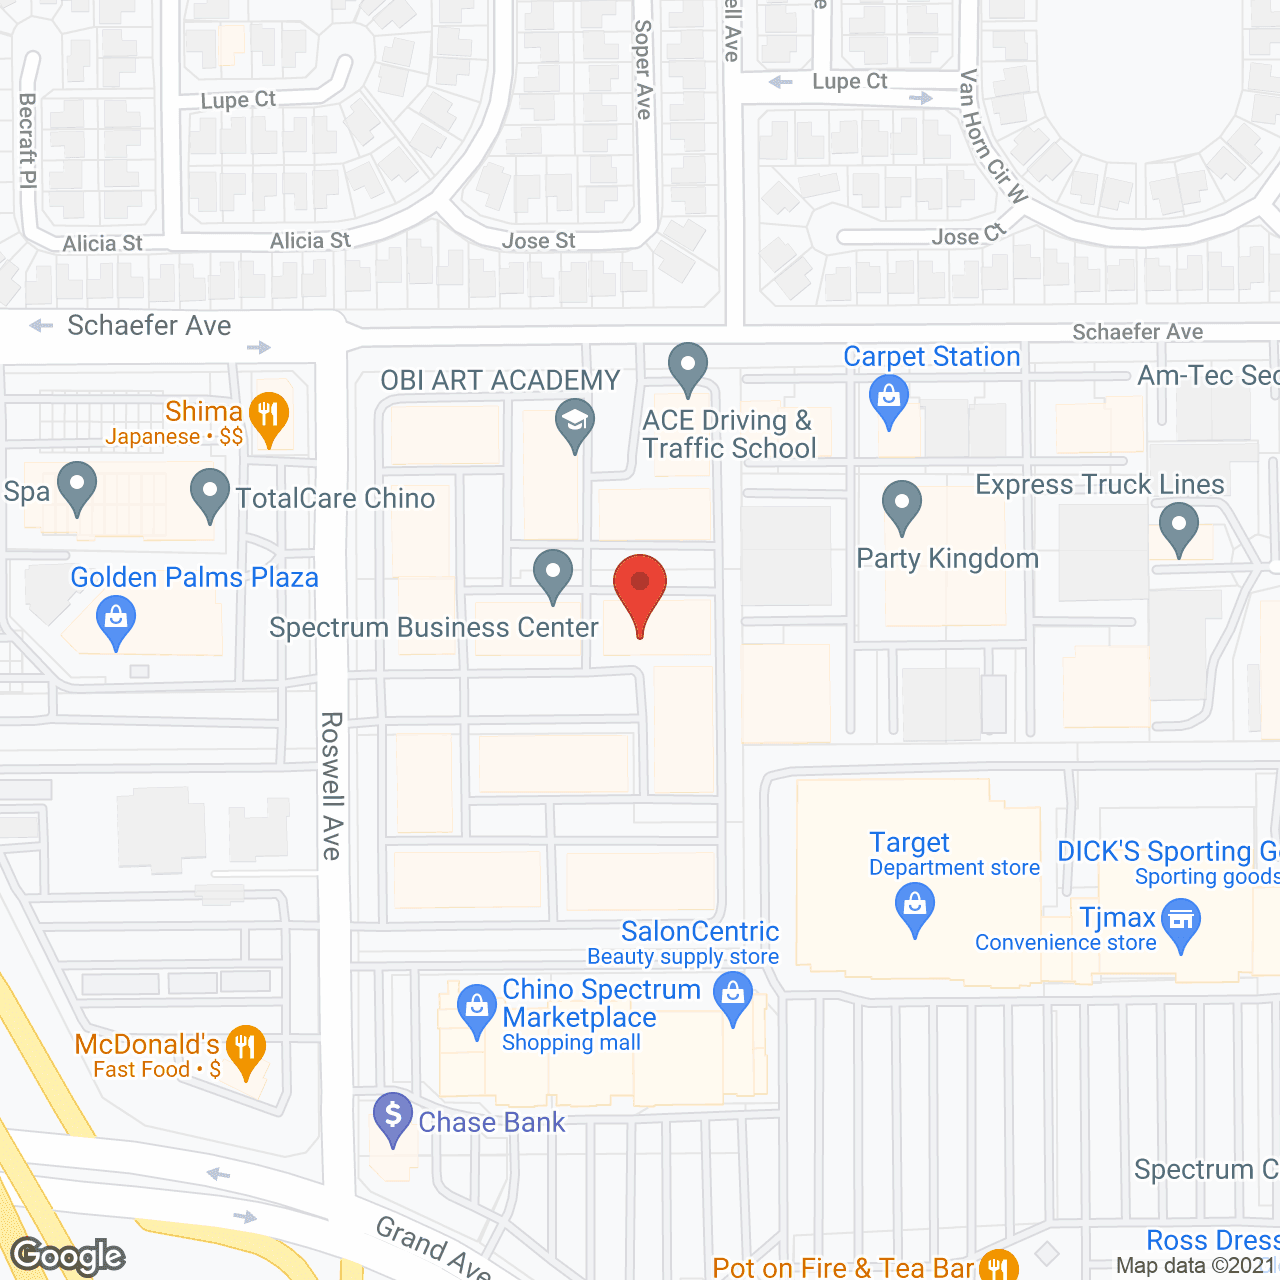 Bios Care Services in google map